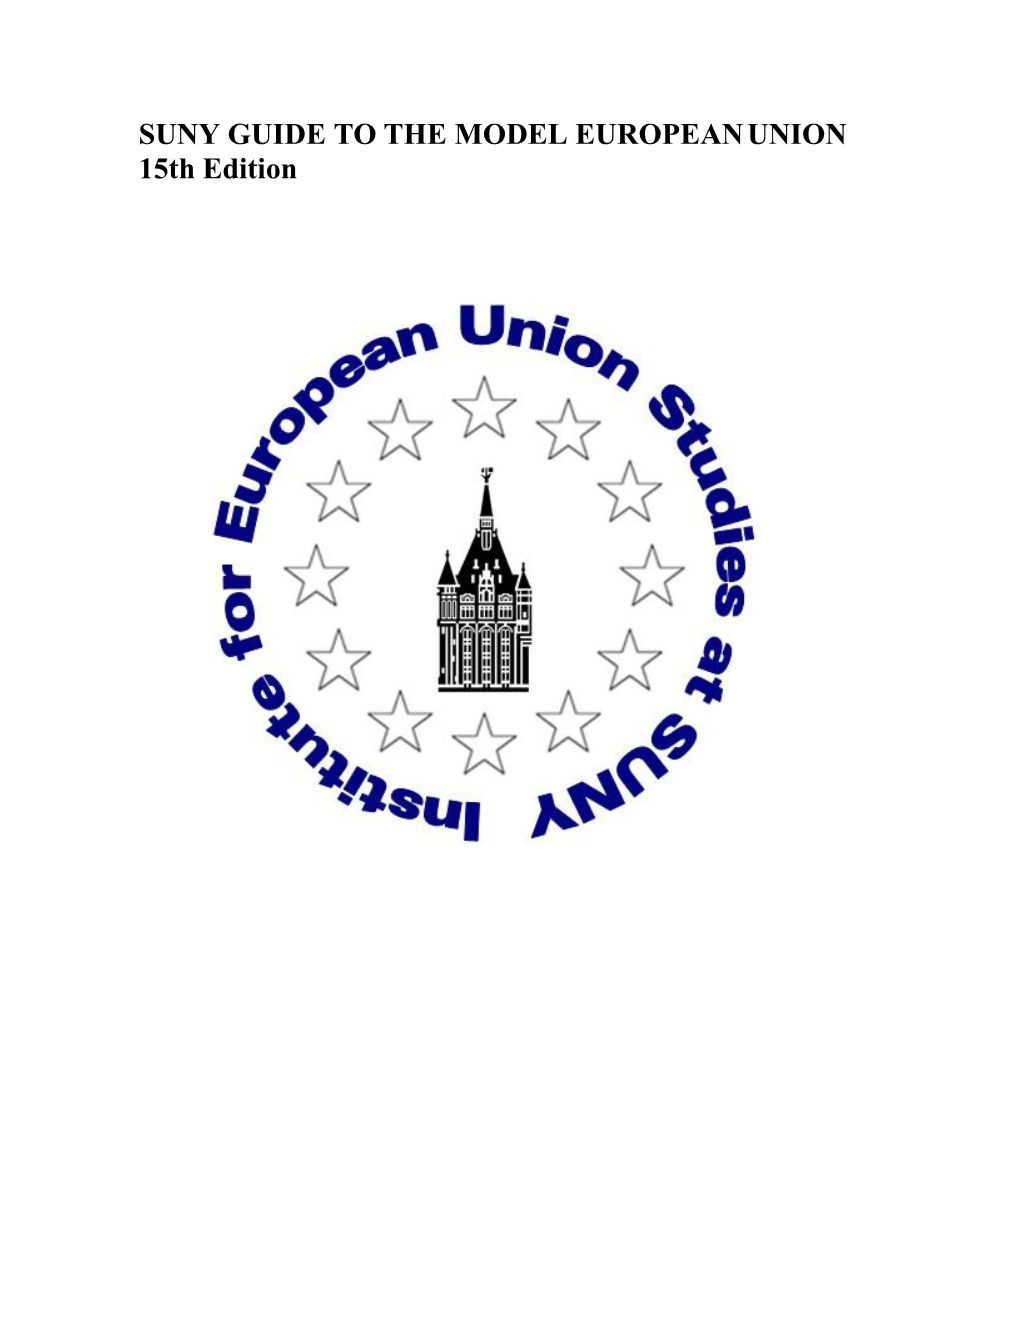 SUNY Guide to the Model European Union. 15Th Edition. 2021